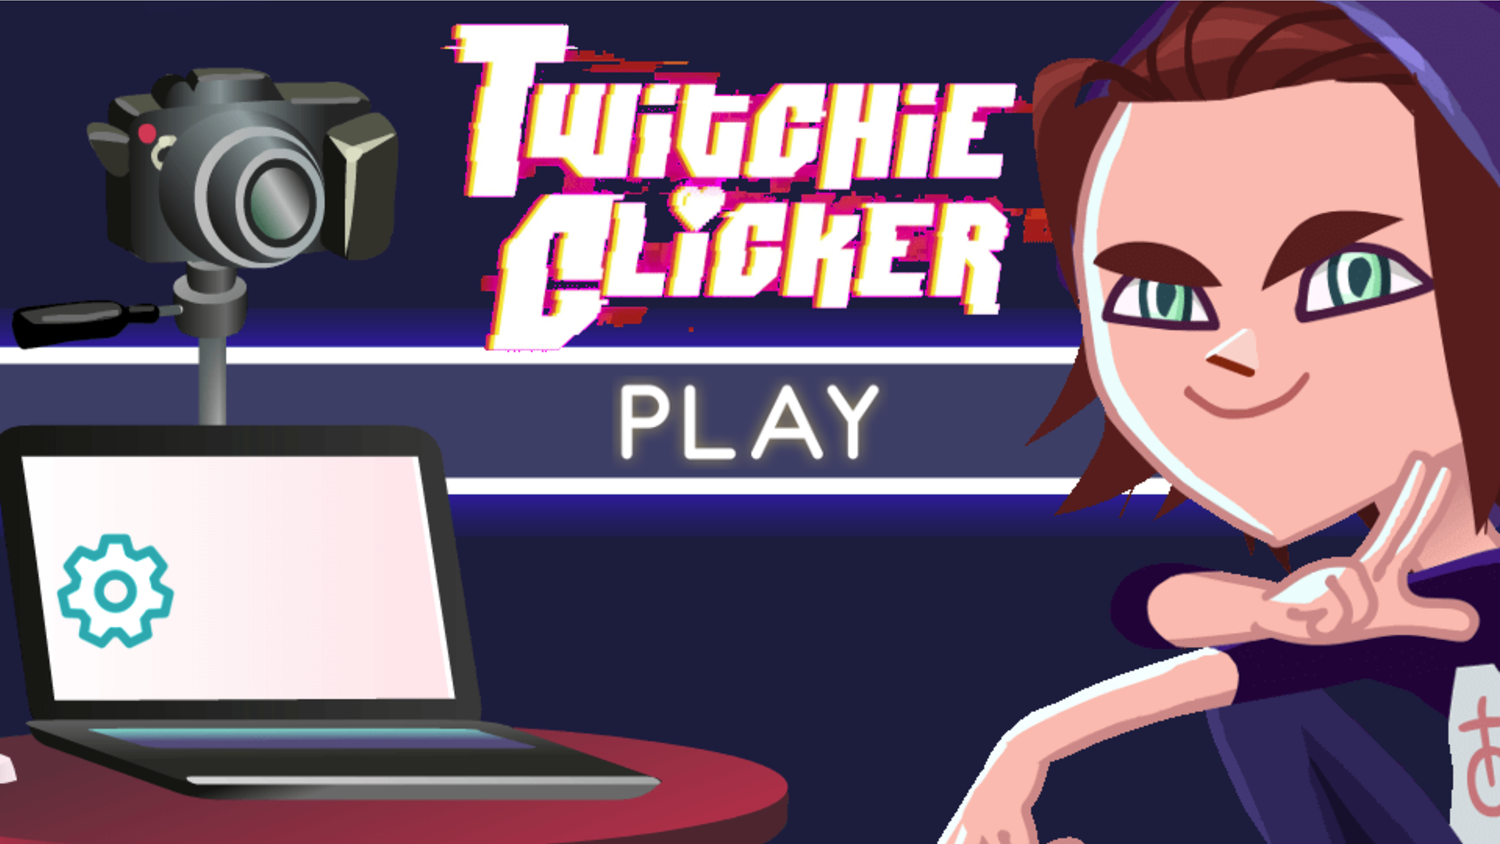 Twitchie Clicker Game Welcome Screen Screenshot.